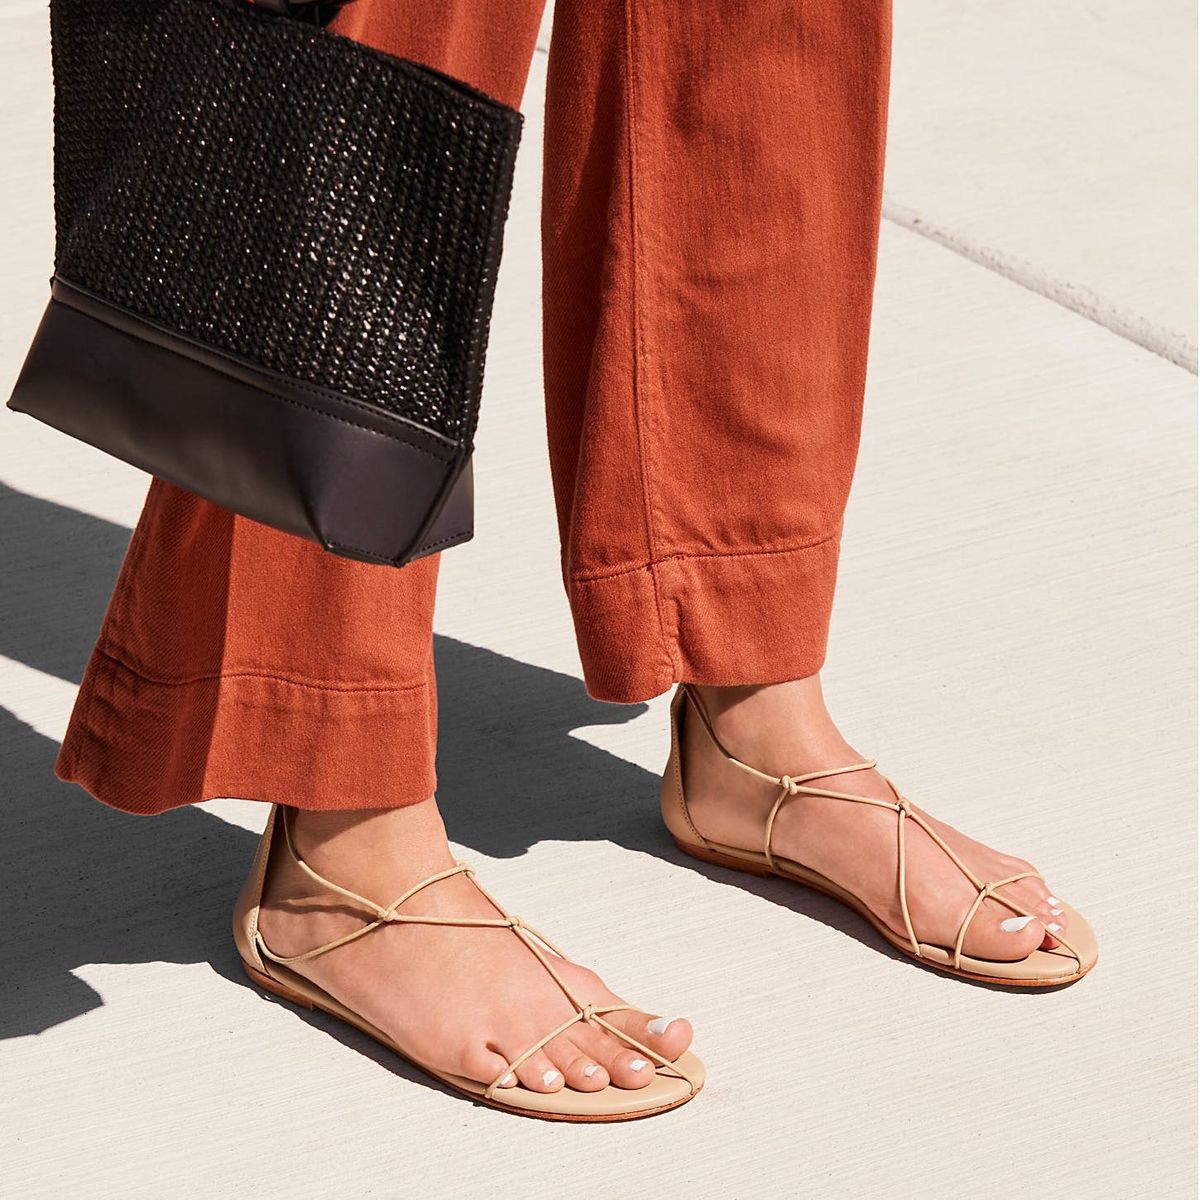 16 Barely There Strappy Sandals to Strut in All Summer Long